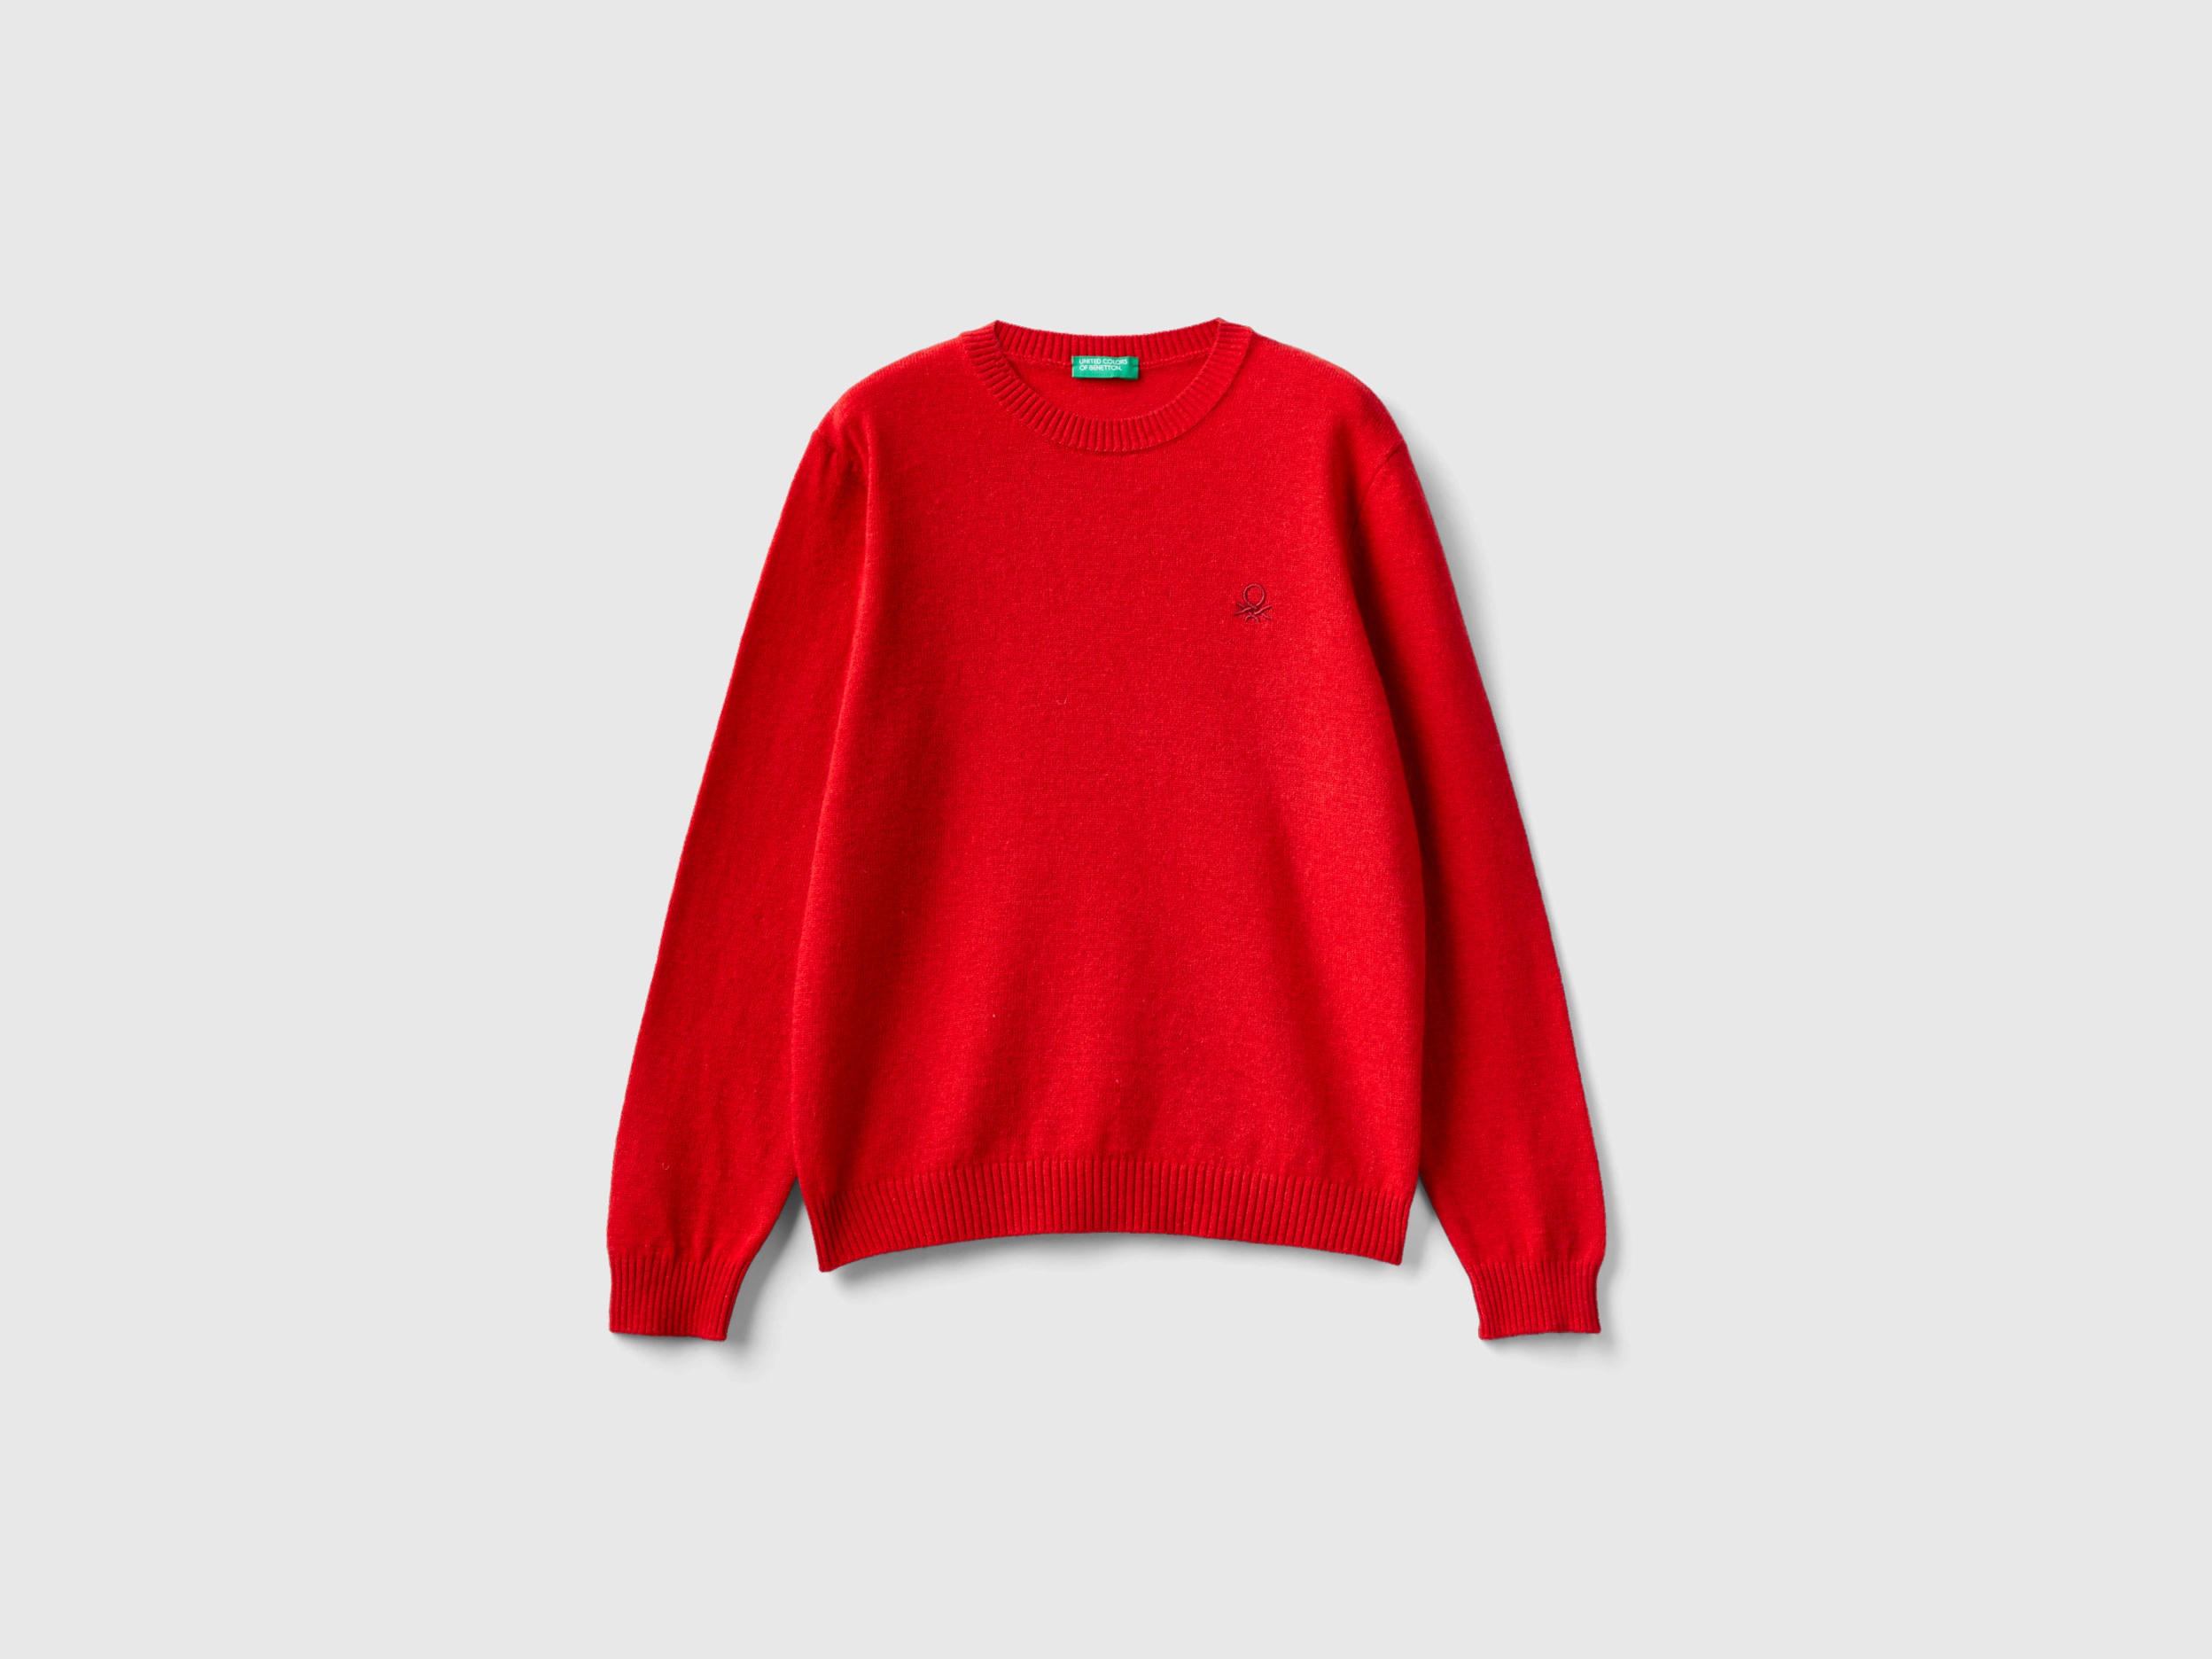 Benetton, Sweater In Cashmere And Wool Blend, size L, Red, Kids